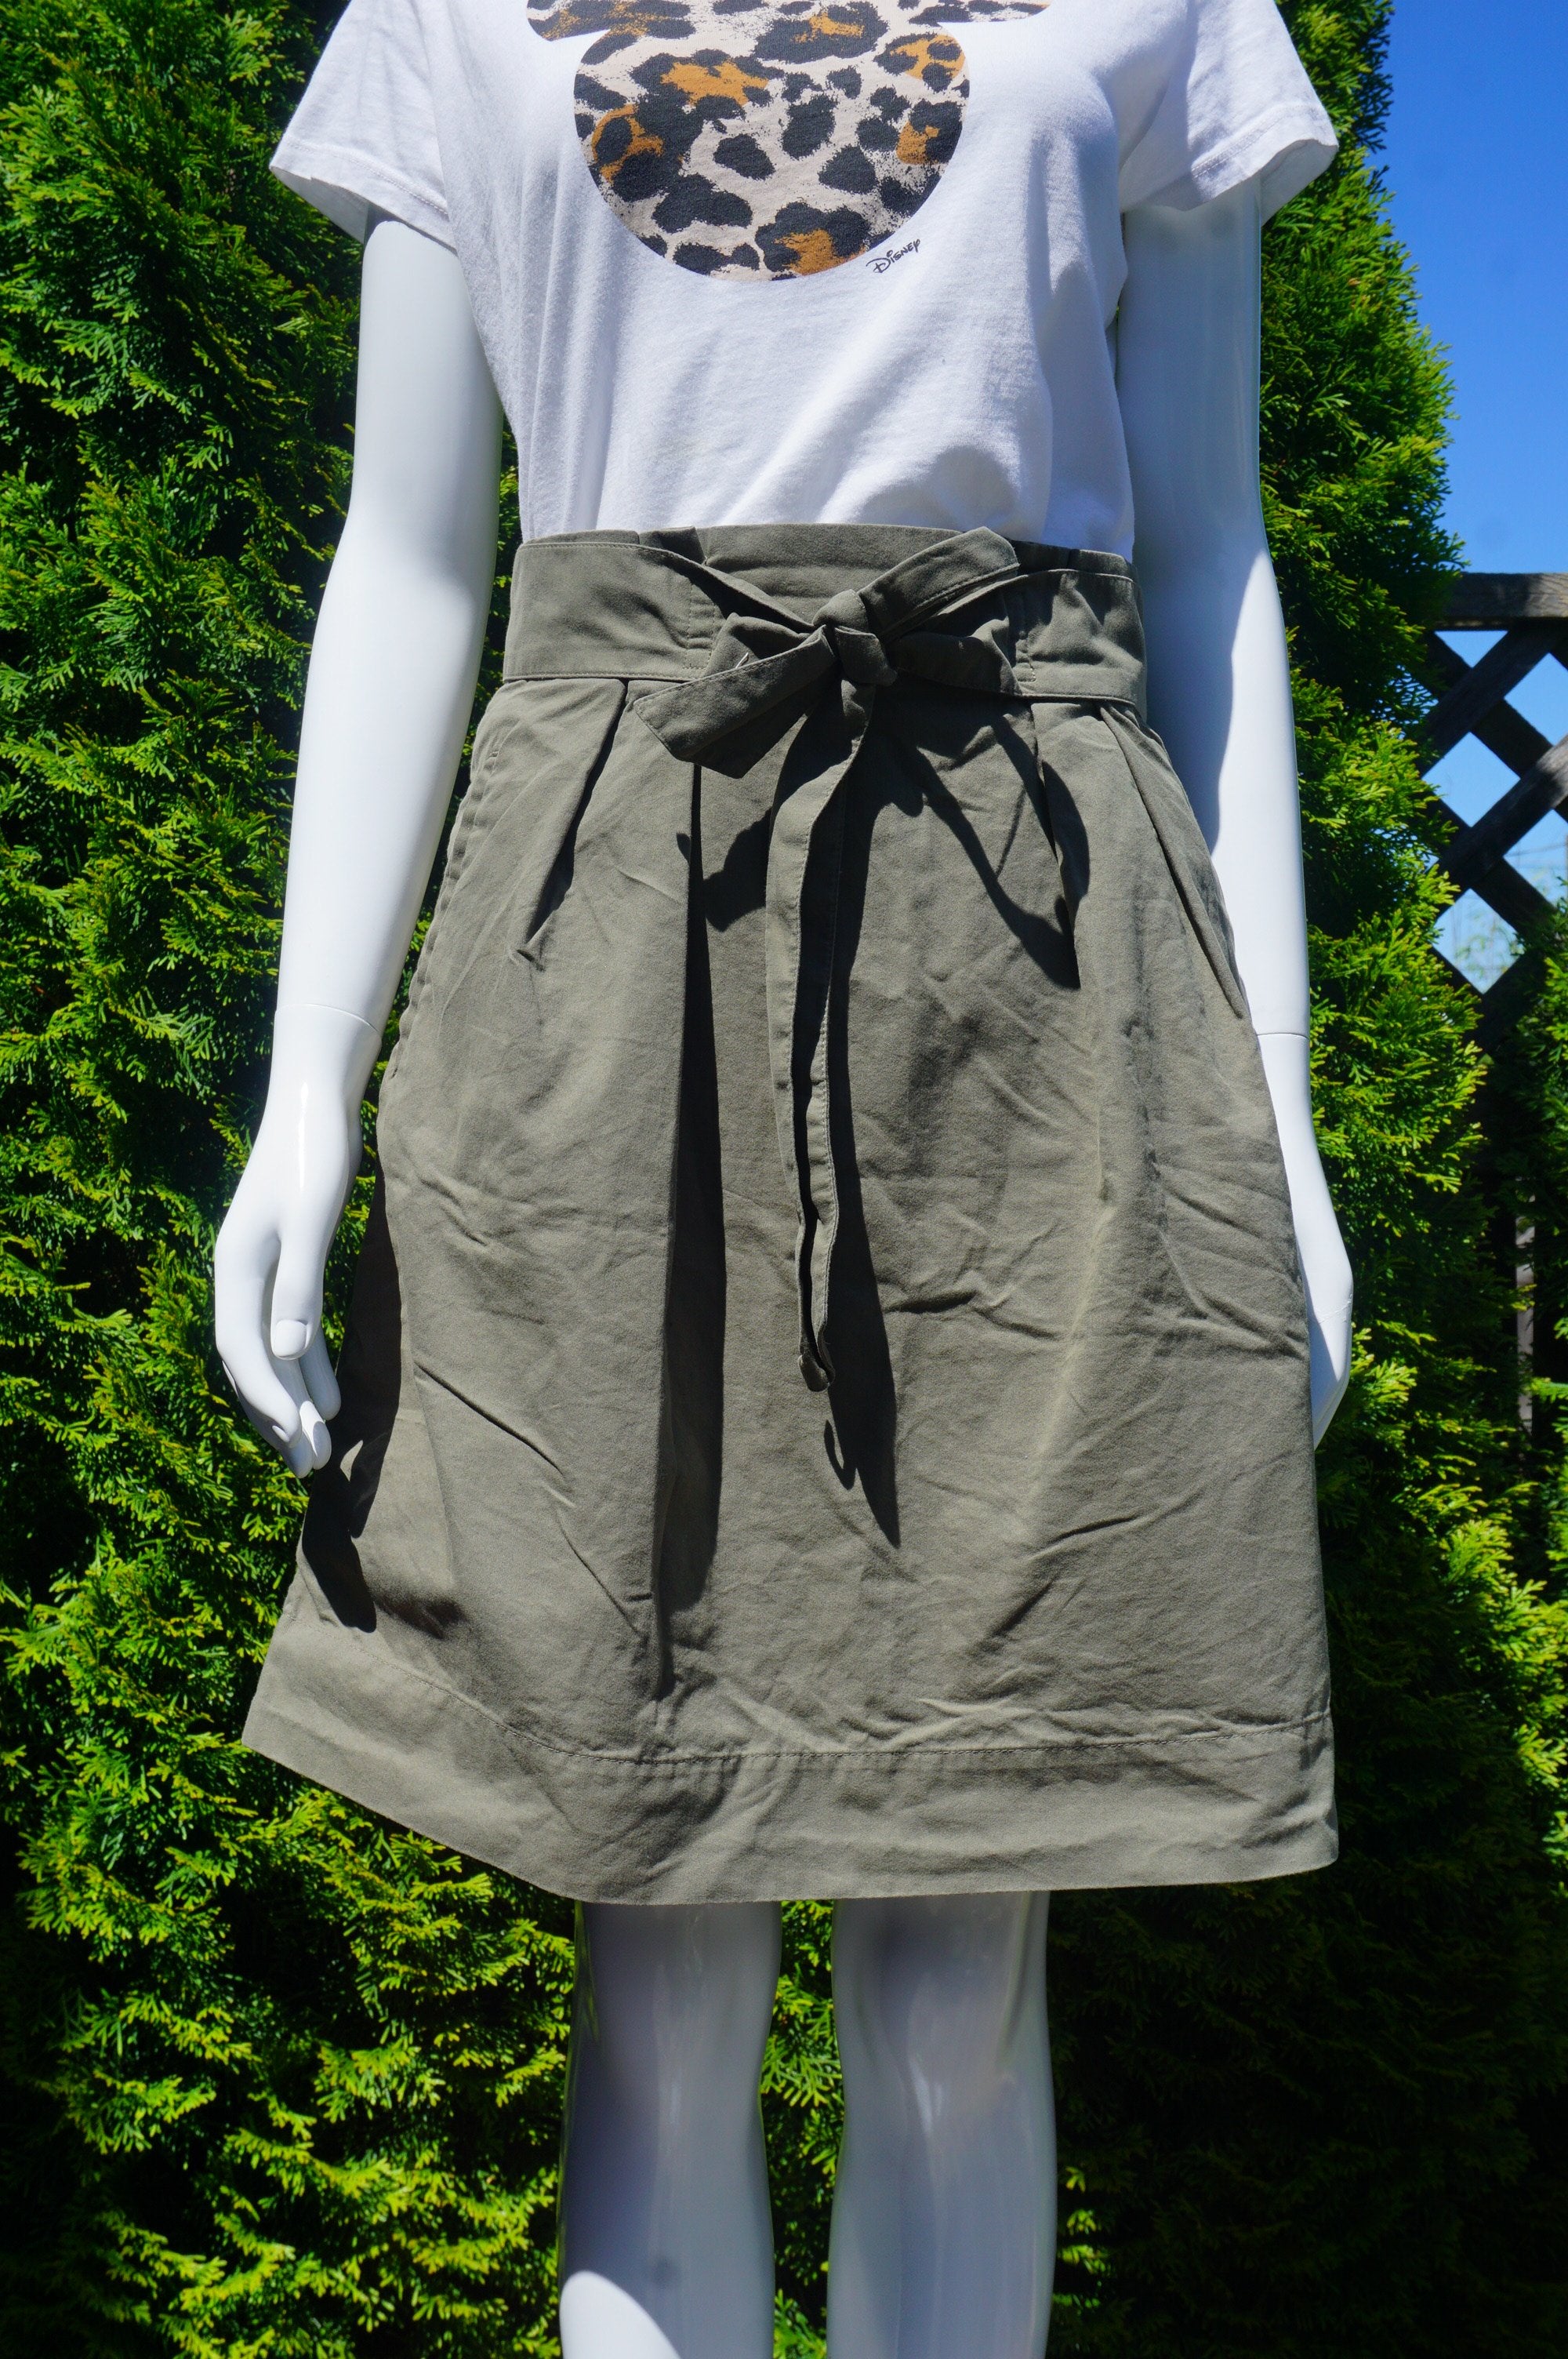 H&M Green Midi Skirt with Front Tie, Simple skirt for the summer., Green, 64% Cotton, 30% Polyester6% Polyamide, women's Skirts & Shorts, women's Green Skirts & Shorts, H&M women's Skirts & Shorts, summer skirt, casual skirt, green skirt, midi skirt, casual mid-length skirt